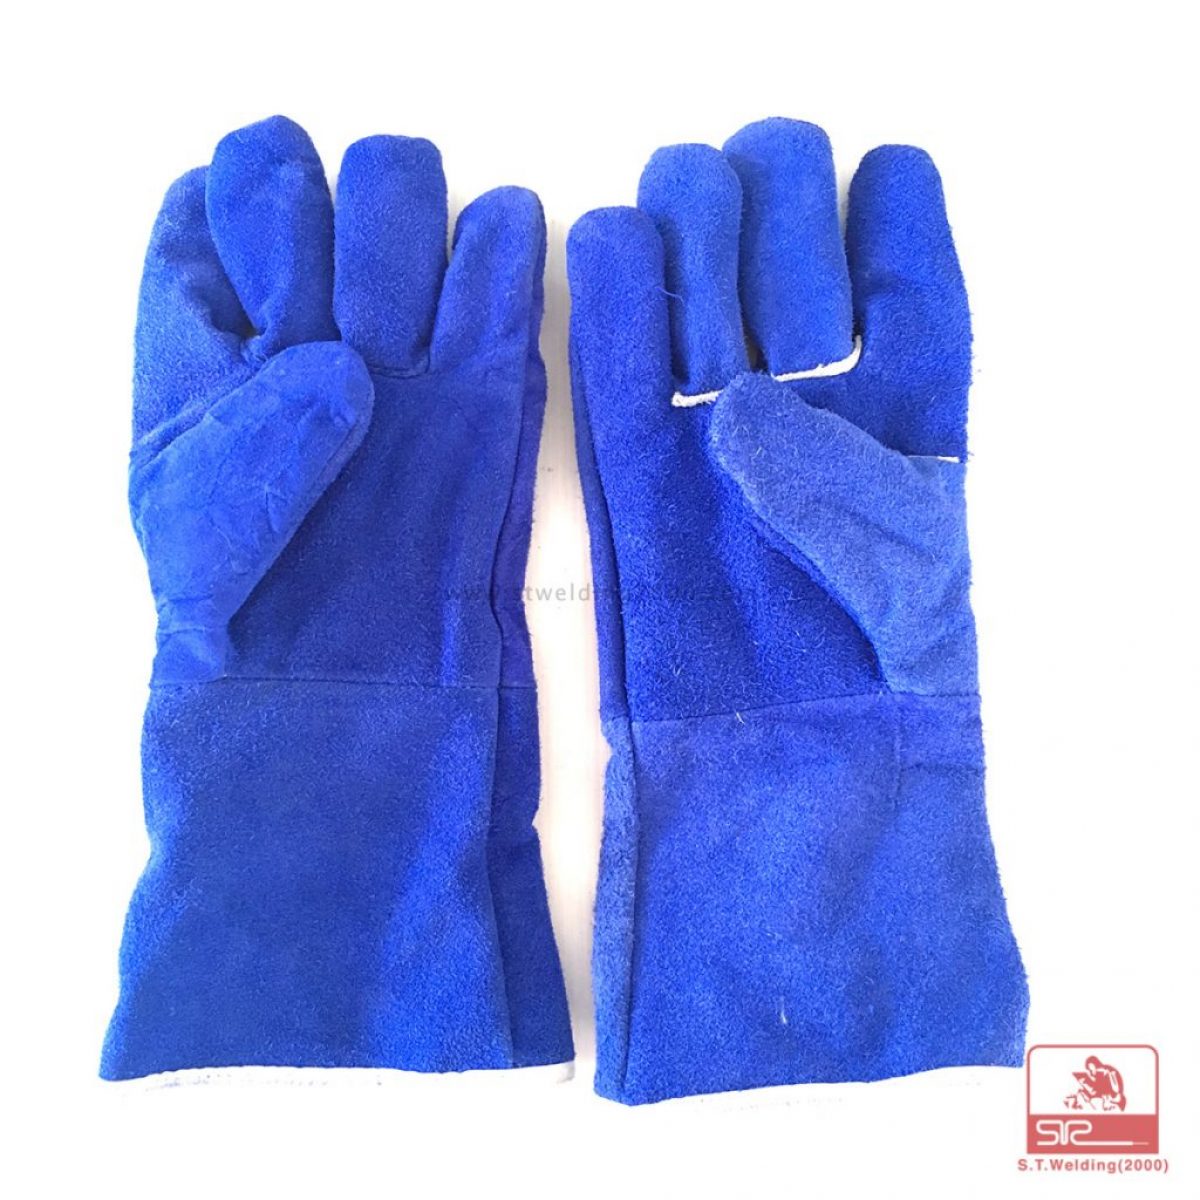 Heat protected gloves